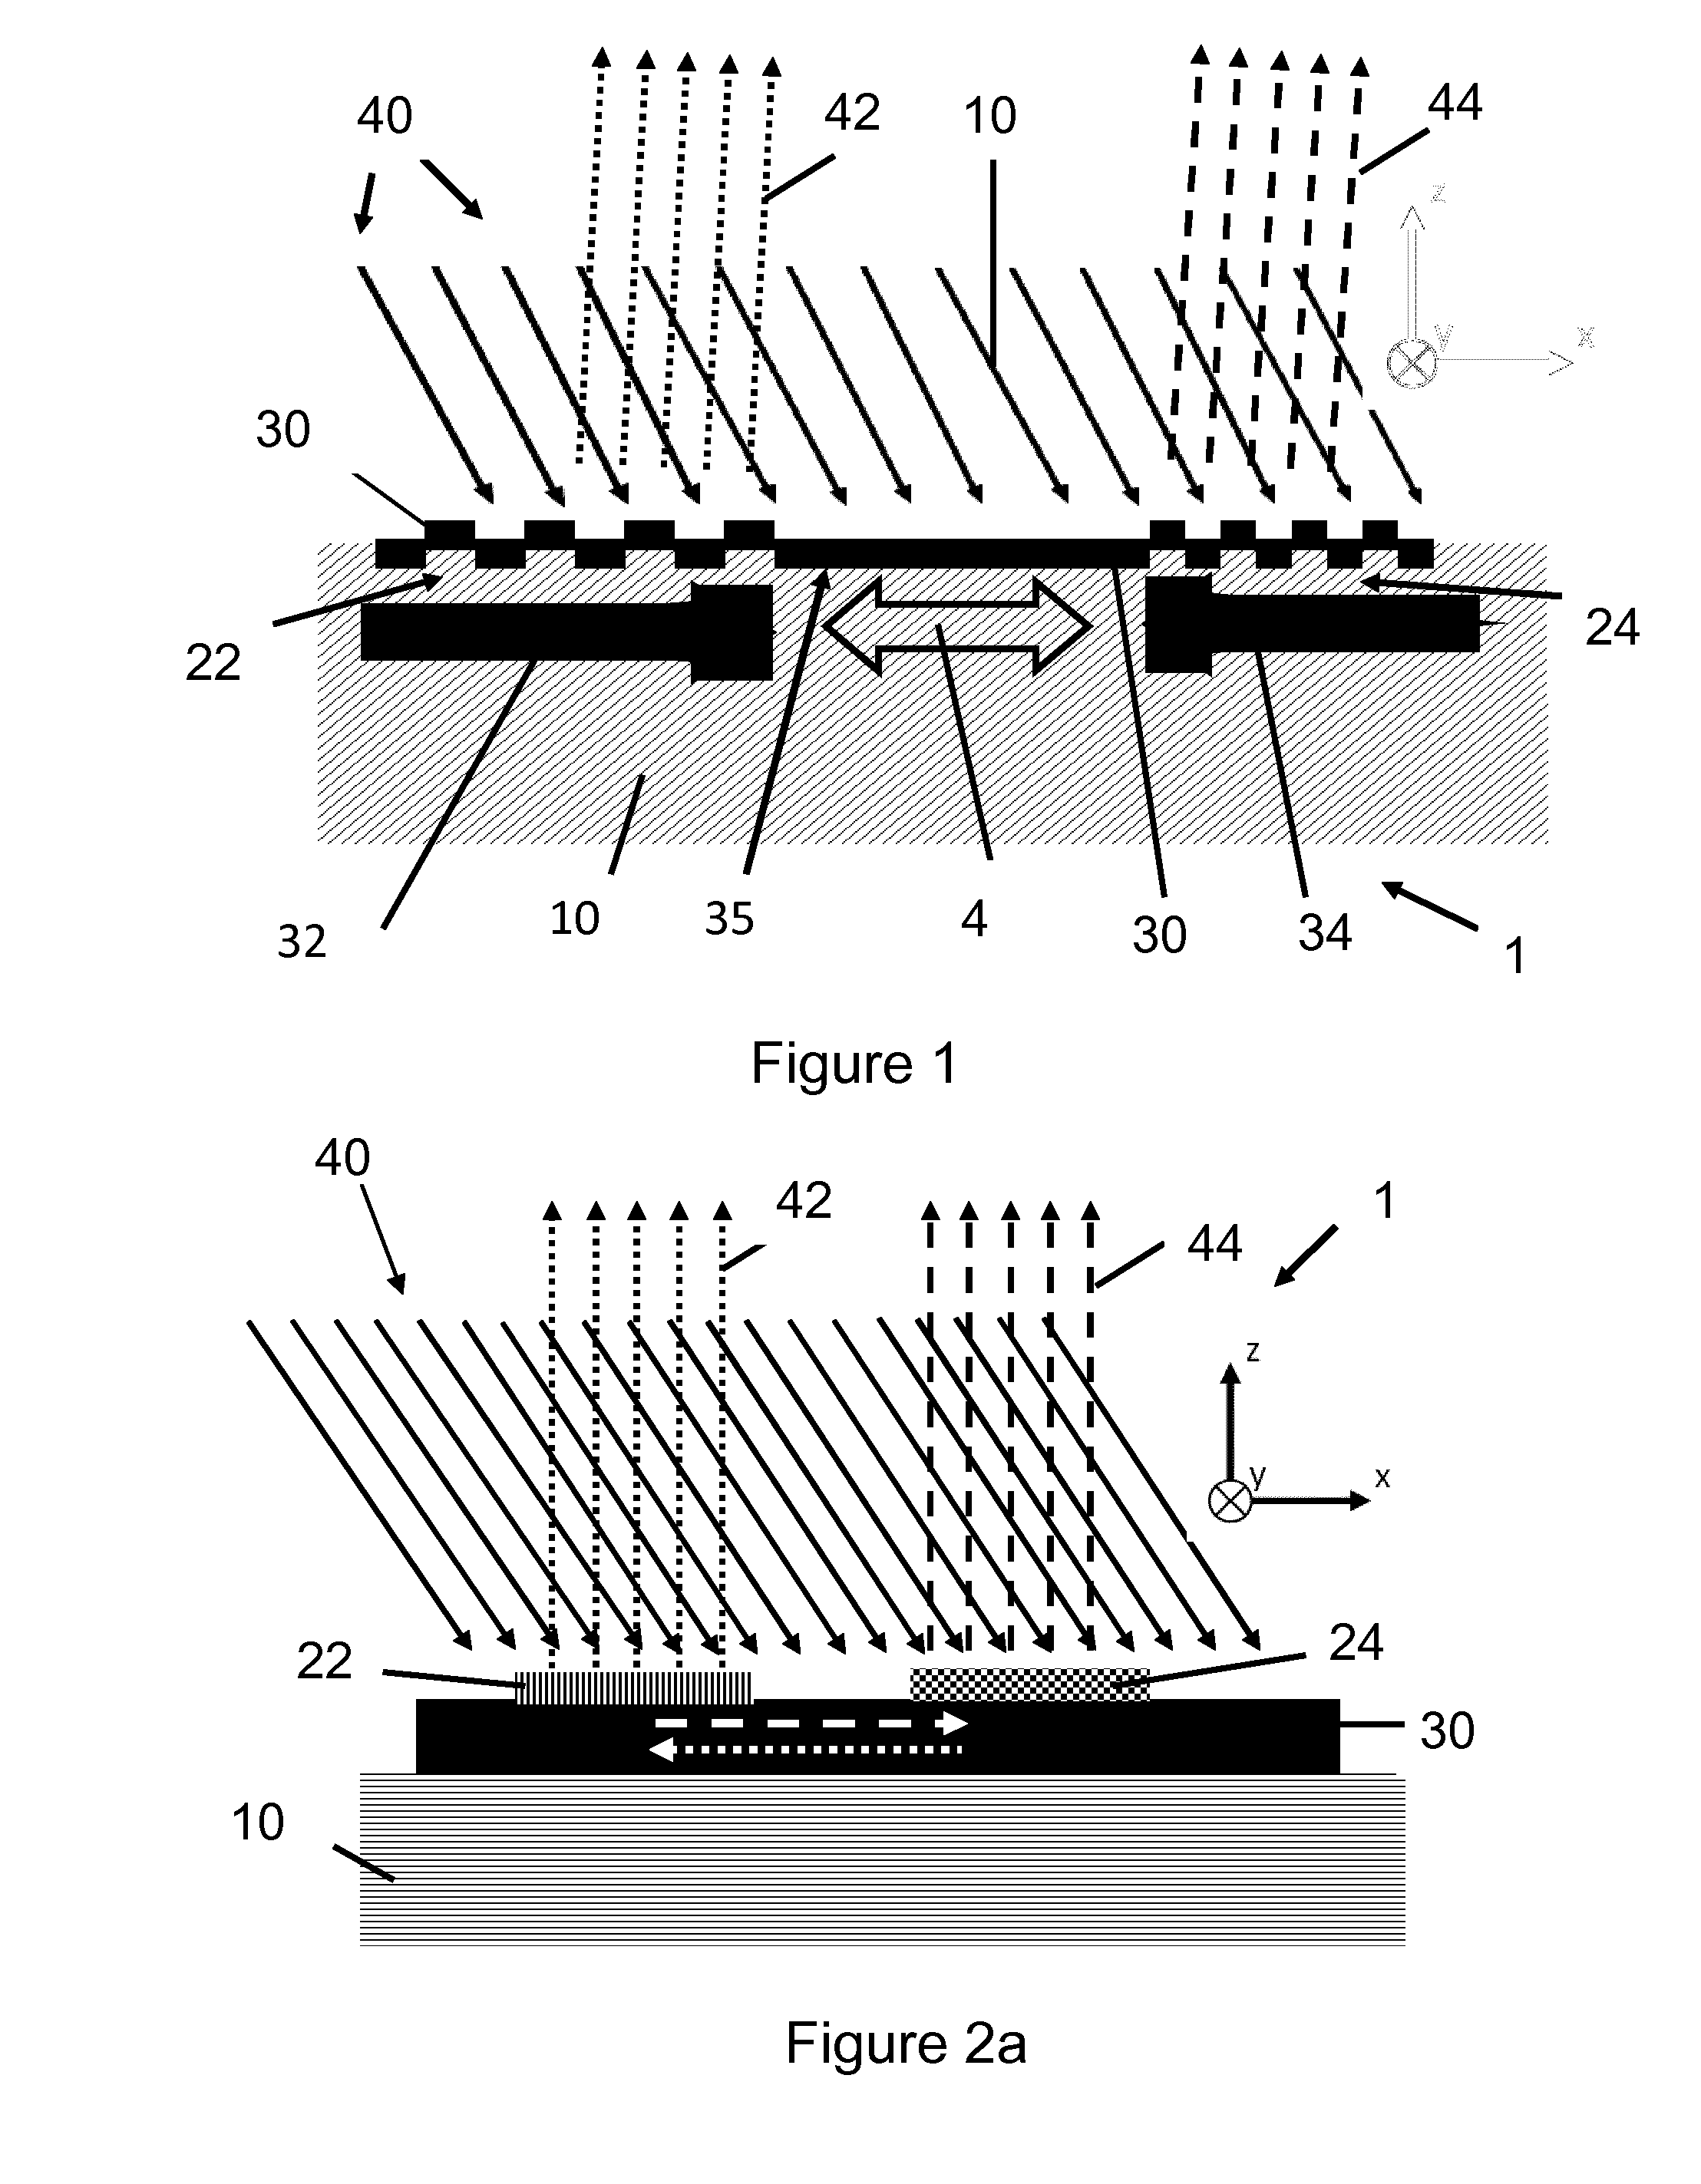 Guided mode resonance device